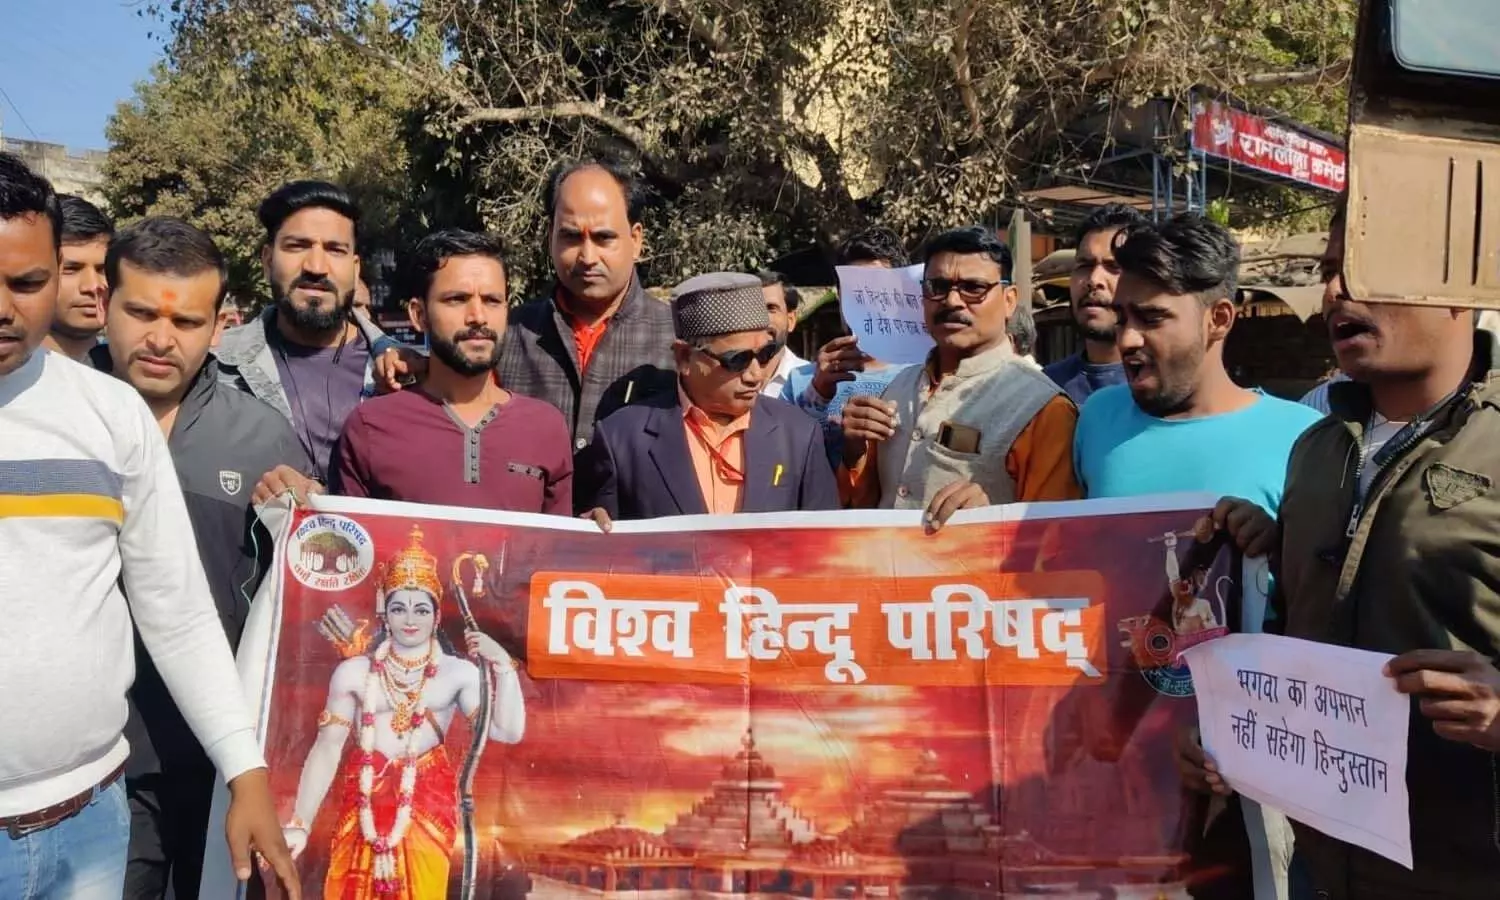 People of Hindu organizations took to the streets demanding a ban on Pathan movie in Sonbhadra, Shah Rukhs effigy was burnt